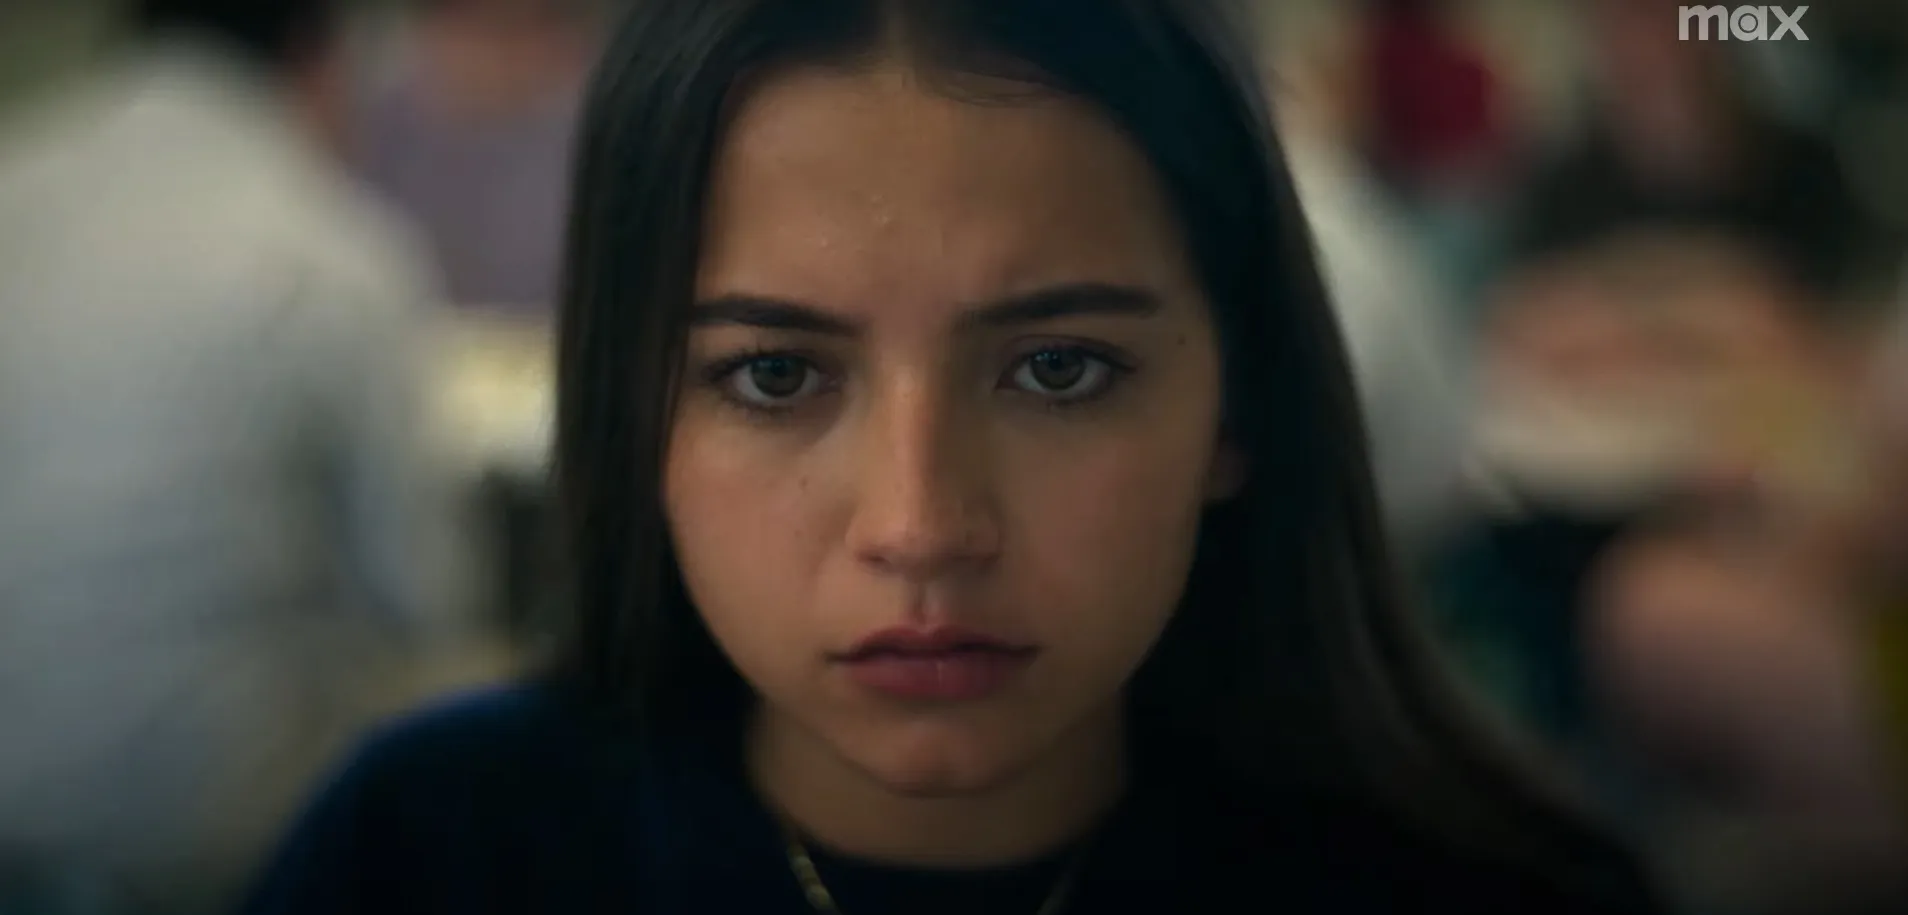 Turtles All the Way Down Trailer: Isabela Merced Leads Max’s Teen Drama Movie